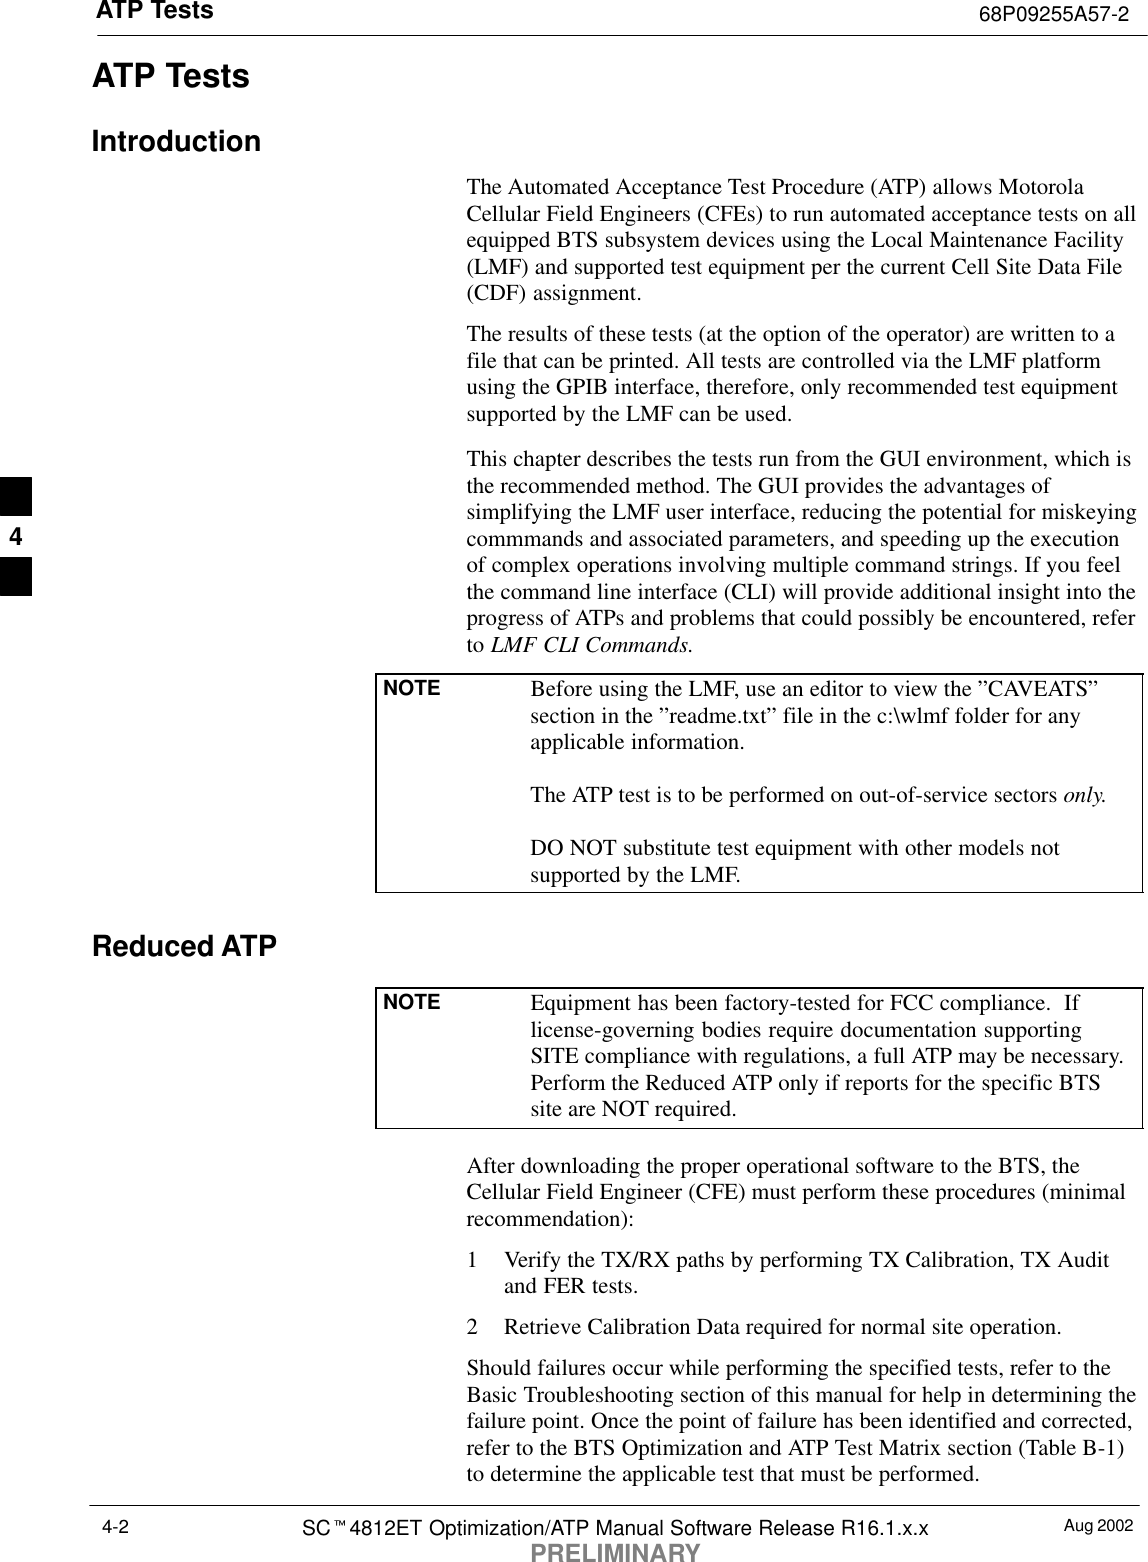 ATP Tests 68P09255A57-2Aug 2002SCt4812ET Optimization/ATP Manual Software Release R16.1.x.xPRELIMINARY4-2ATP TestsIntroductionThe Automated Acceptance Test Procedure (ATP) allows MotorolaCellular Field Engineers (CFEs) to run automated acceptance tests on allequipped BTS subsystem devices using the Local Maintenance Facility(LMF) and supported test equipment per the current Cell Site Data File(CDF) assignment.The results of these tests (at the option of the operator) are written to afile that can be printed. All tests are controlled via the LMF platformusing the GPIB interface, therefore, only recommended test equipmentsupported by the LMF can be used.This chapter describes the tests run from the GUI environment, which isthe recommended method. The GUI provides the advantages ofsimplifying the LMF user interface, reducing the potential for miskeyingcommmands and associated parameters, and speeding up the executionof complex operations involving multiple command strings. If you feelthe command line interface (CLI) will provide additional insight into theprogress of ATPs and problems that could possibly be encountered, referto LMF CLI Commands.NOTE Before using the LMF, use an editor to view the ”CAVEATS”section in the ”readme.txt” file in the c:\wlmf folder for anyapplicable information.The ATP test is to be performed on out-of-service sectors only.DO NOT substitute test equipment with other models notsupported by the LMF.Reduced ATPNOTE Equipment has been factory-tested for FCC compliance.  Iflicense-governing bodies require documentation supportingSITE compliance with regulations, a full ATP may be necessary.Perform the Reduced ATP only if reports for the specific BTSsite are NOT required.After downloading the proper operational software to the BTS, theCellular Field Engineer (CFE) must perform these procedures (minimalrecommendation):1 Verify the TX/RX paths by performing TX Calibration, TX Auditand FER tests.2 Retrieve Calibration Data required for normal site operation.Should failures occur while performing the specified tests, refer to theBasic Troubleshooting section of this manual for help in determining thefailure point. Once the point of failure has been identified and corrected,refer to the BTS Optimization and ATP Test Matrix section (Table B-1)to determine the applicable test that must be performed.4